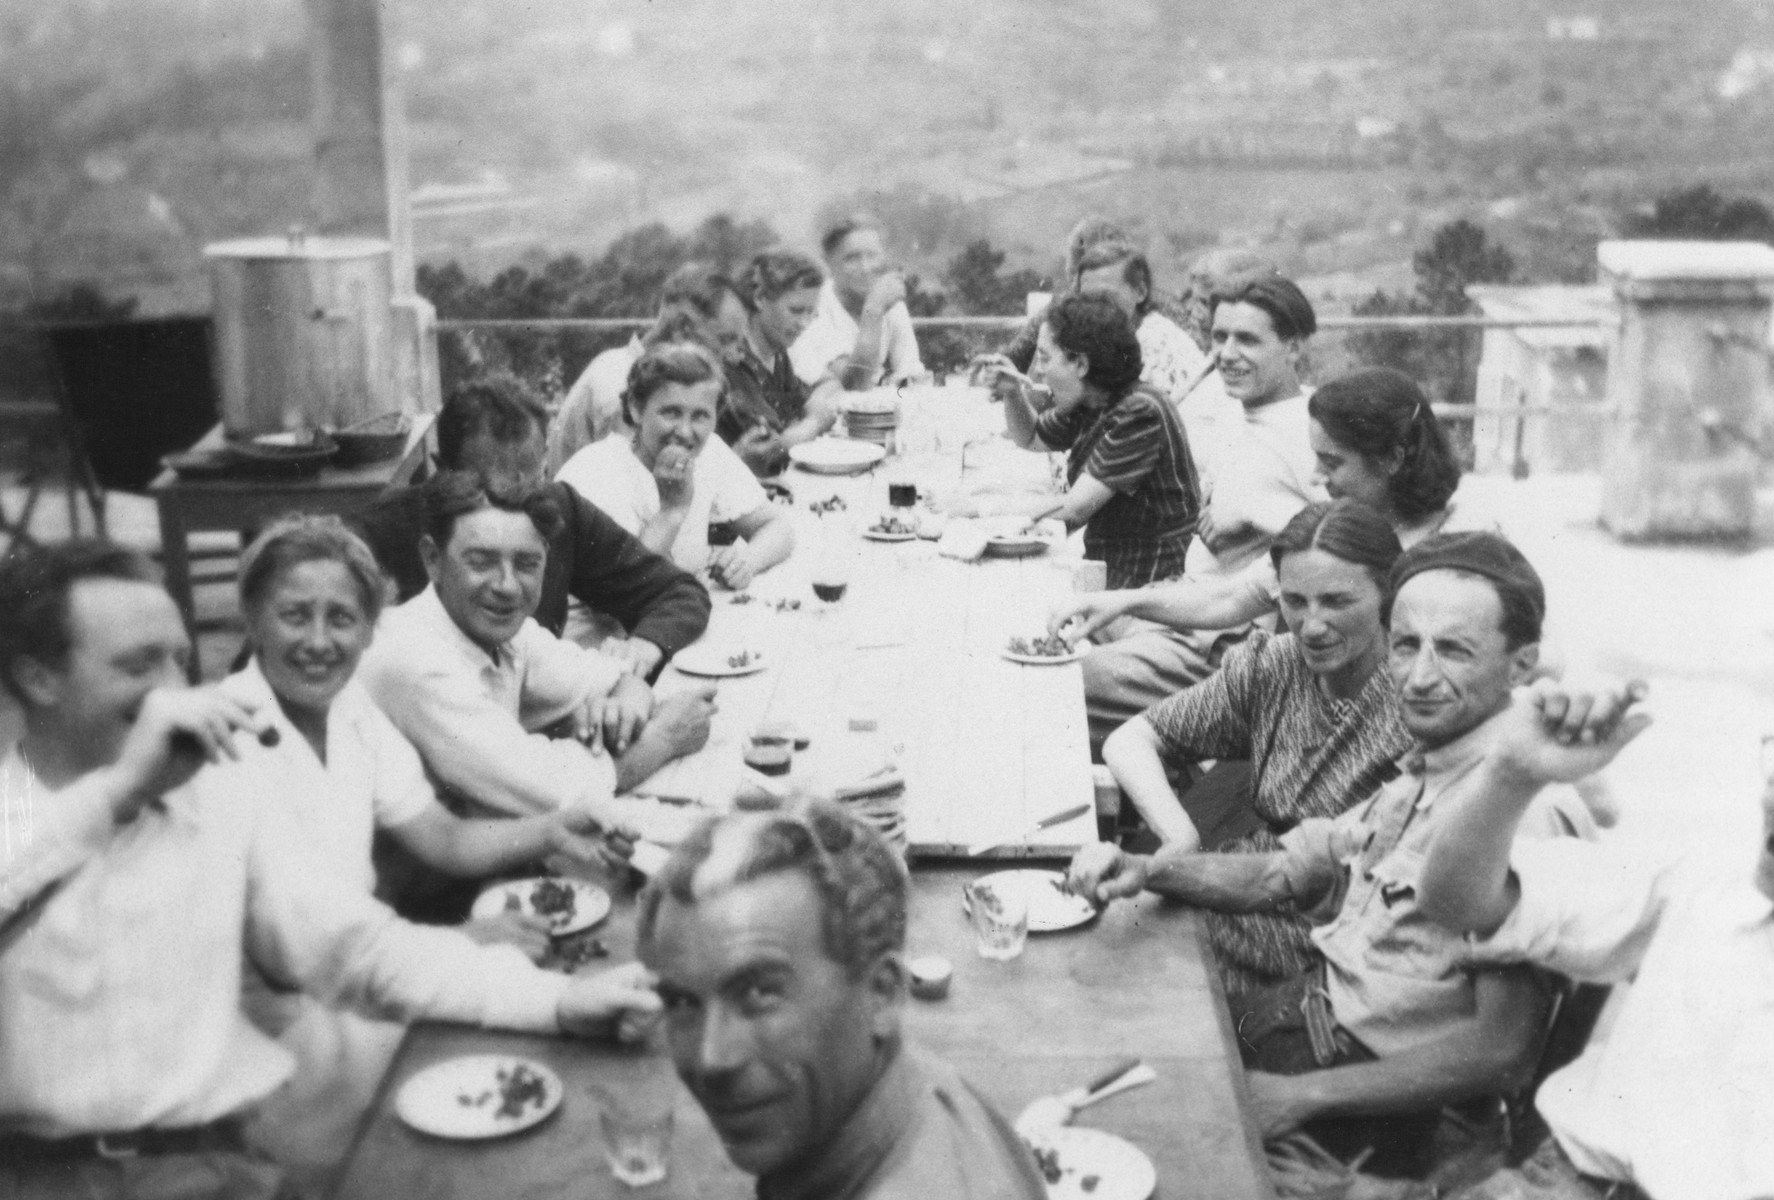 The staff of the MACE (Maison d'Accueil Chretienne pour Enfants) children's home at Vence eats a meal outside on the home's terrace.

Joseph Fisera is pictured in the front facing the camera.